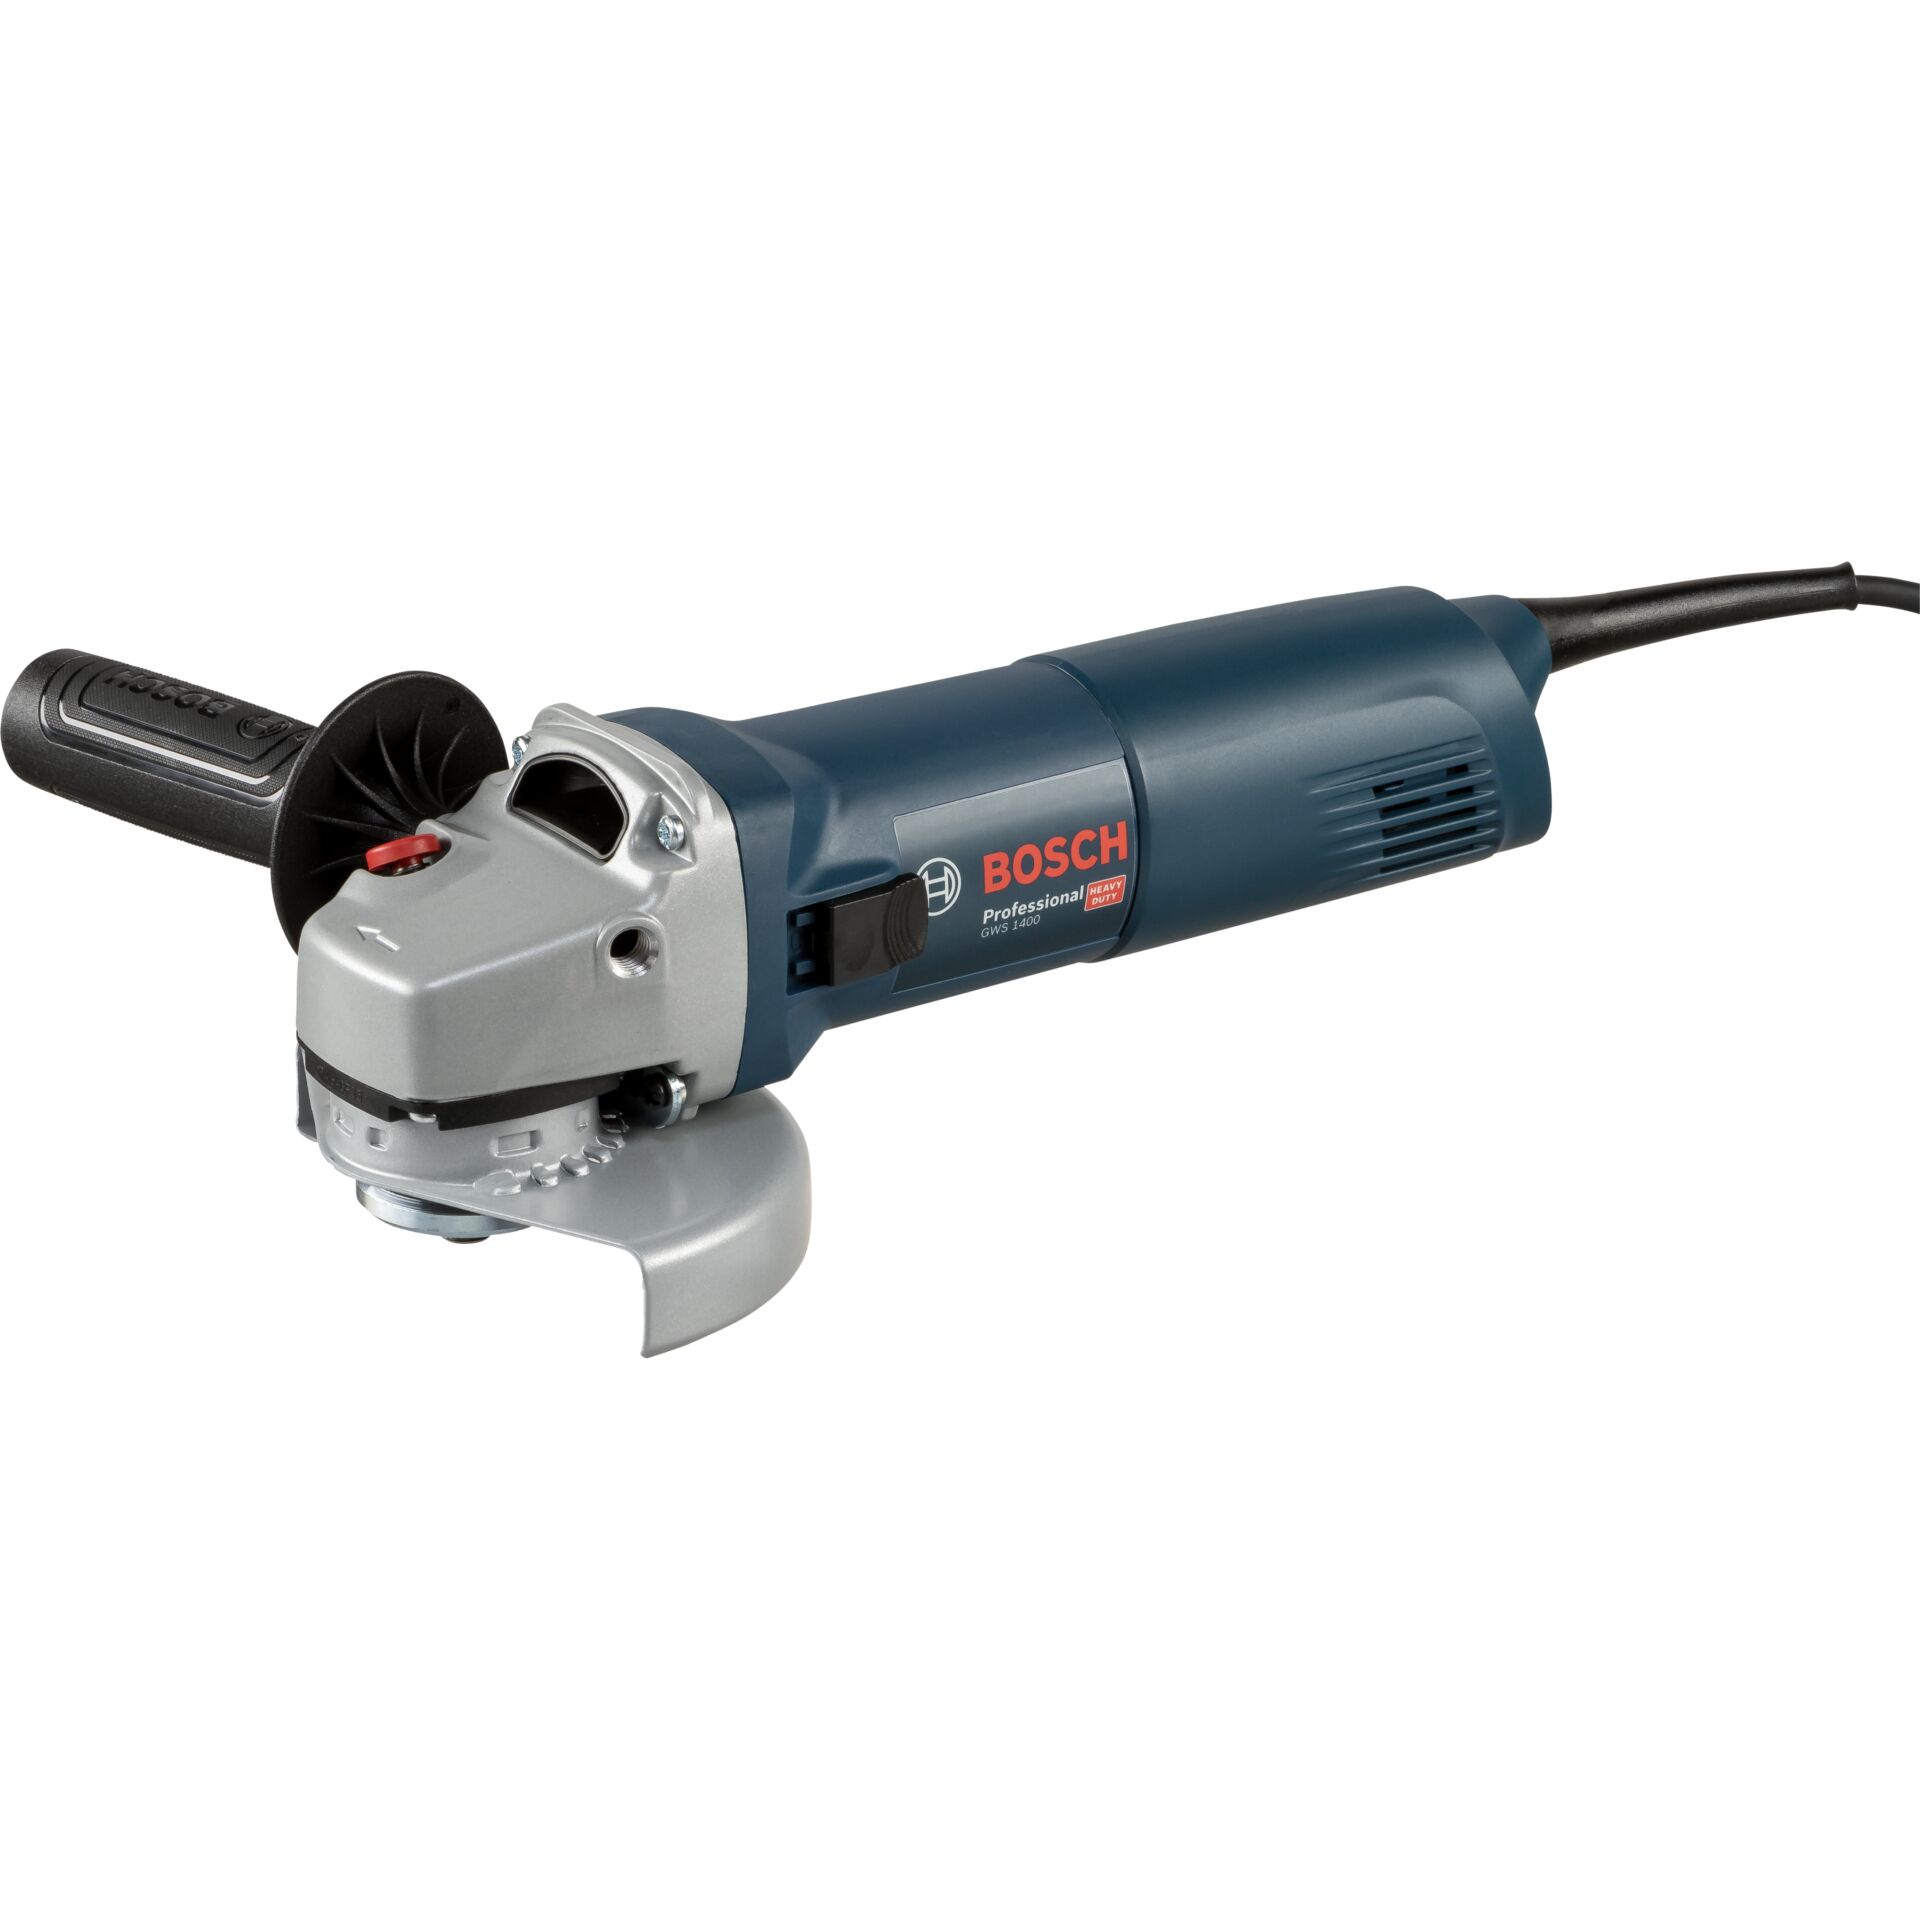 Gws 1400. Bosch GWS 1400. УШМ Bosch GWS 1400. УШМ Bosch 125 1400. Bosch Angle Grinders.